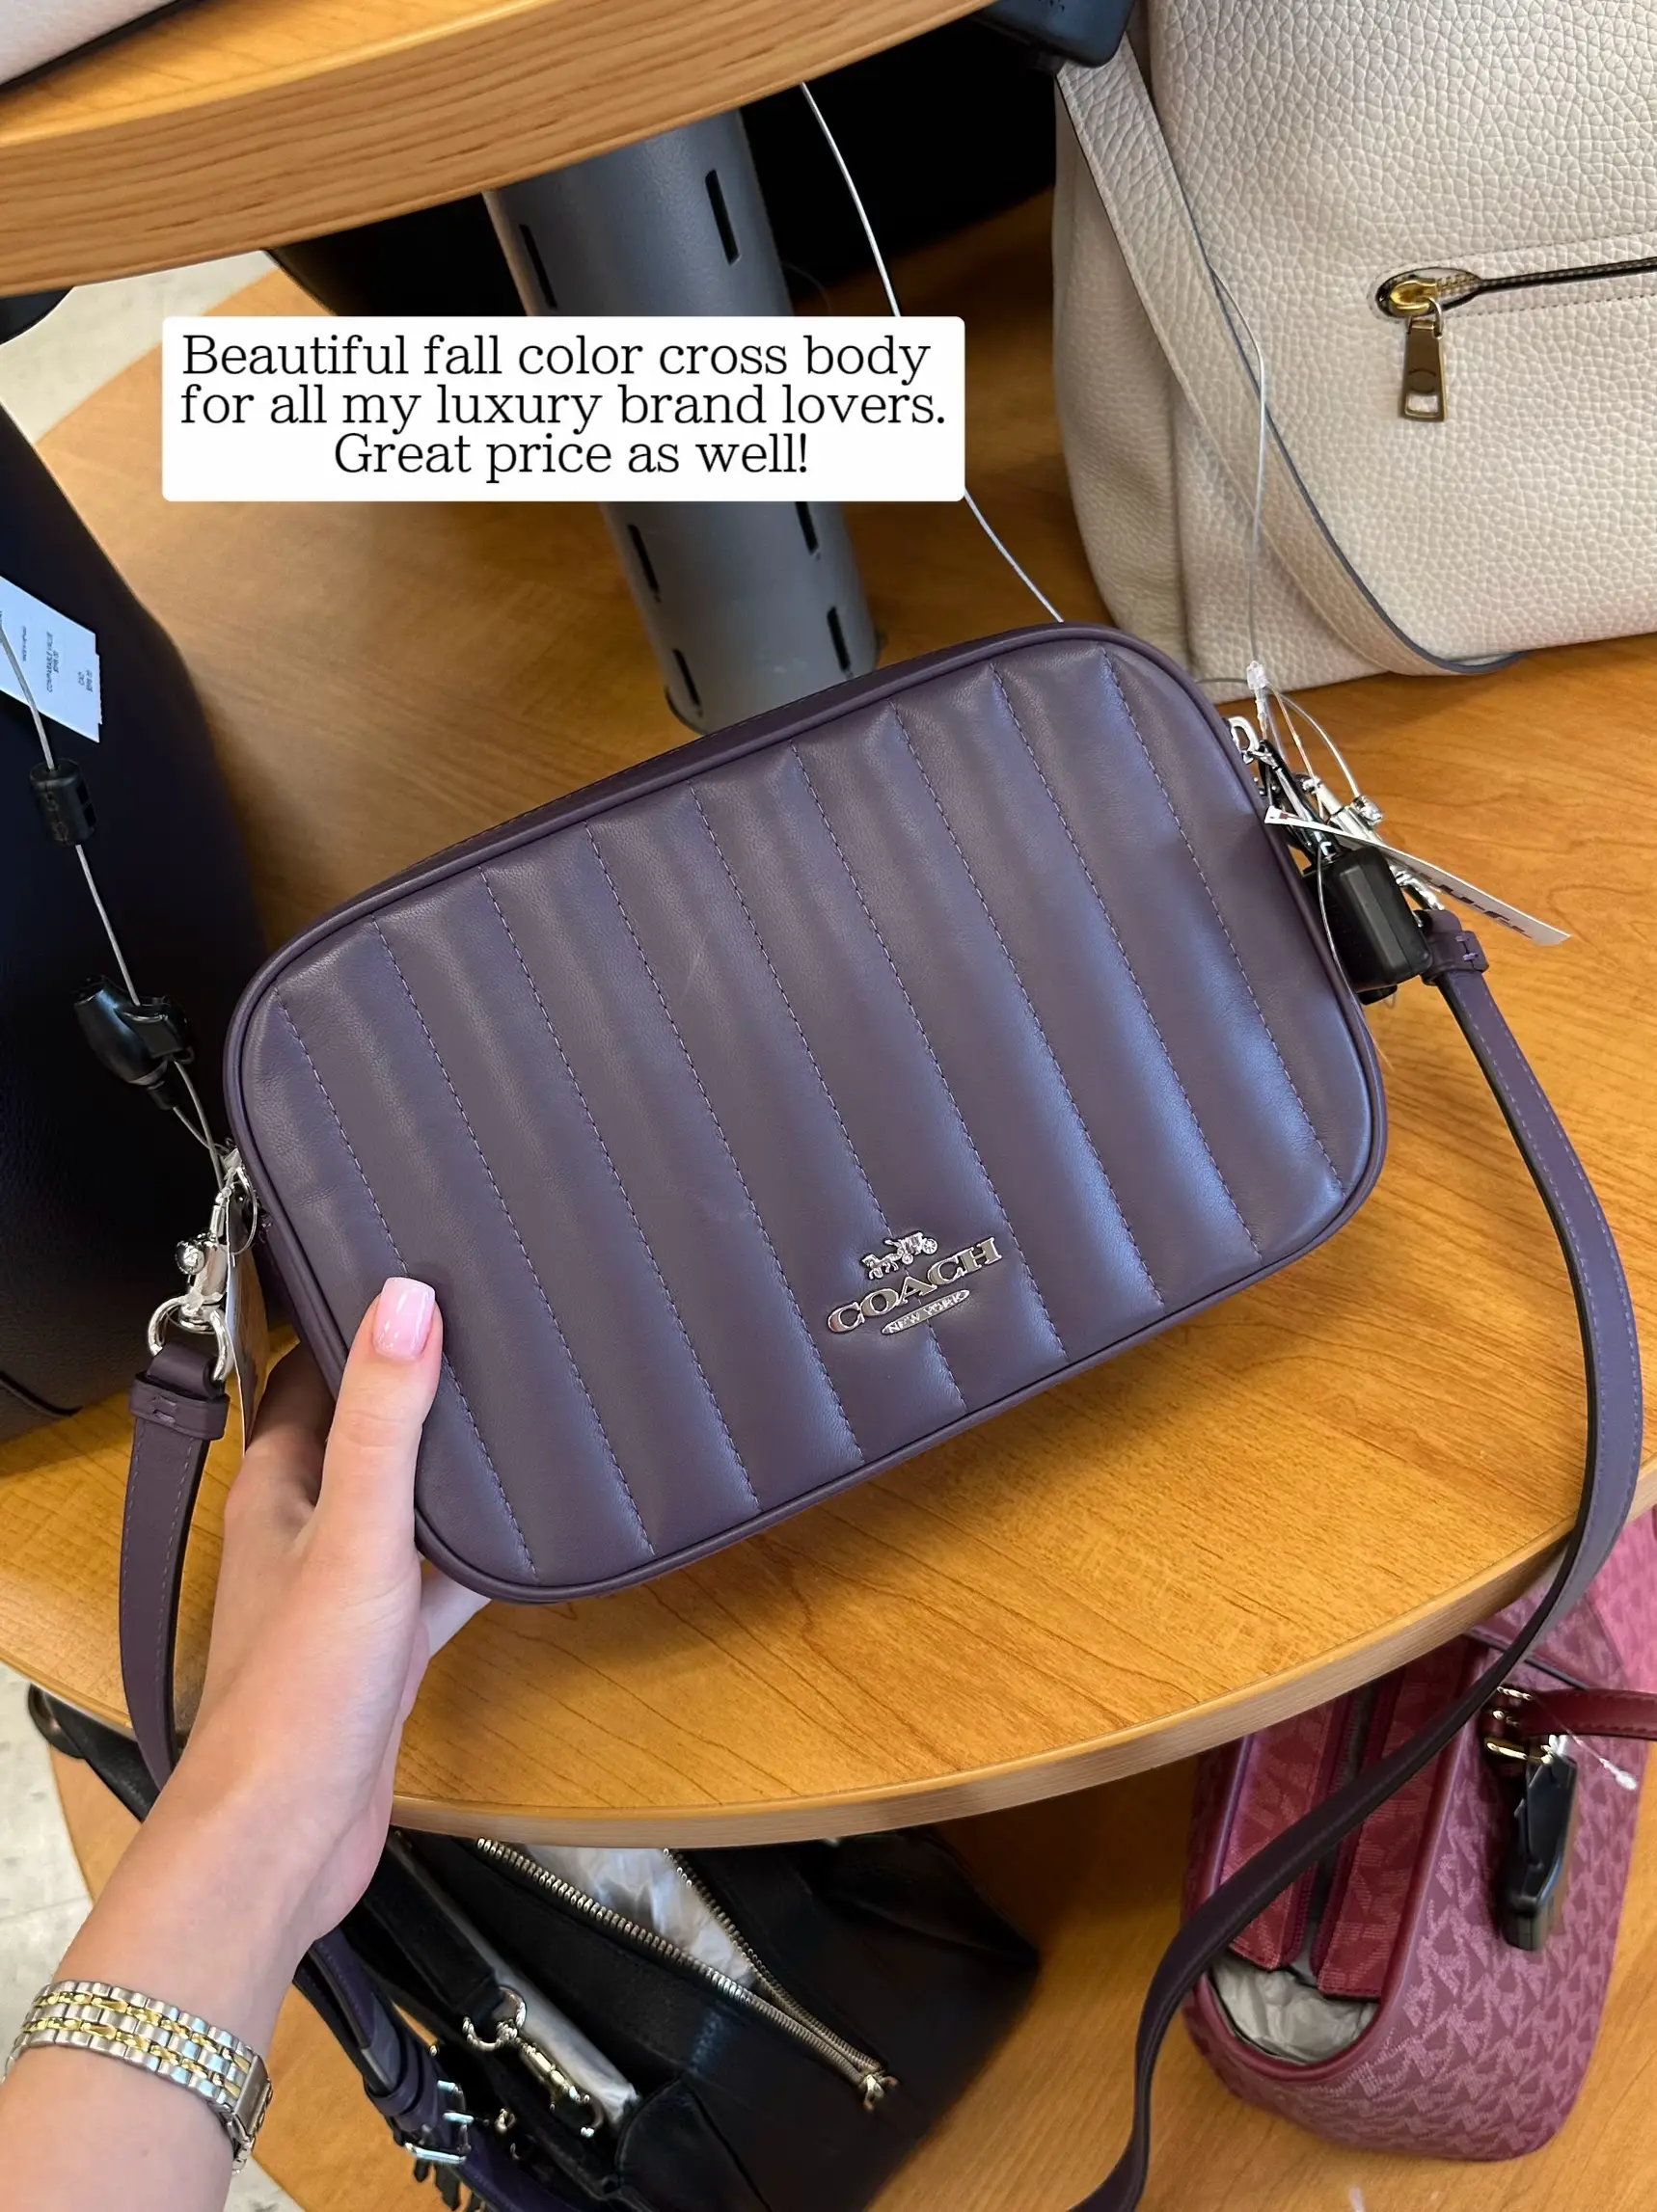 TJ MAXX FINDS: CALVIN KLEIN BAGS  Gallery posted by maddiecohen